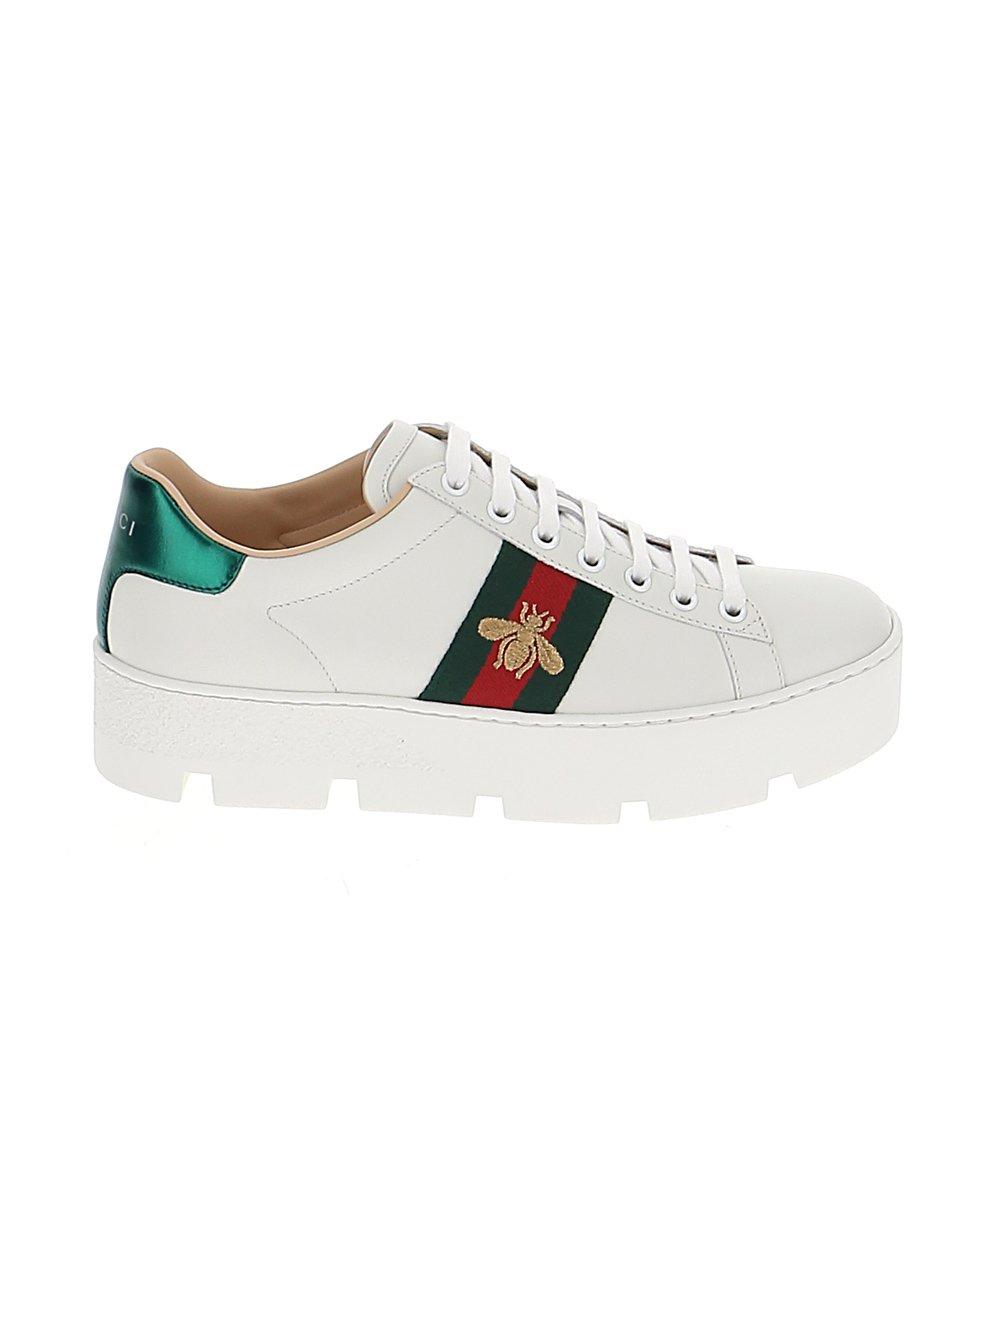 Gucci Leather Ace Platform Sneakers in White - Lyst